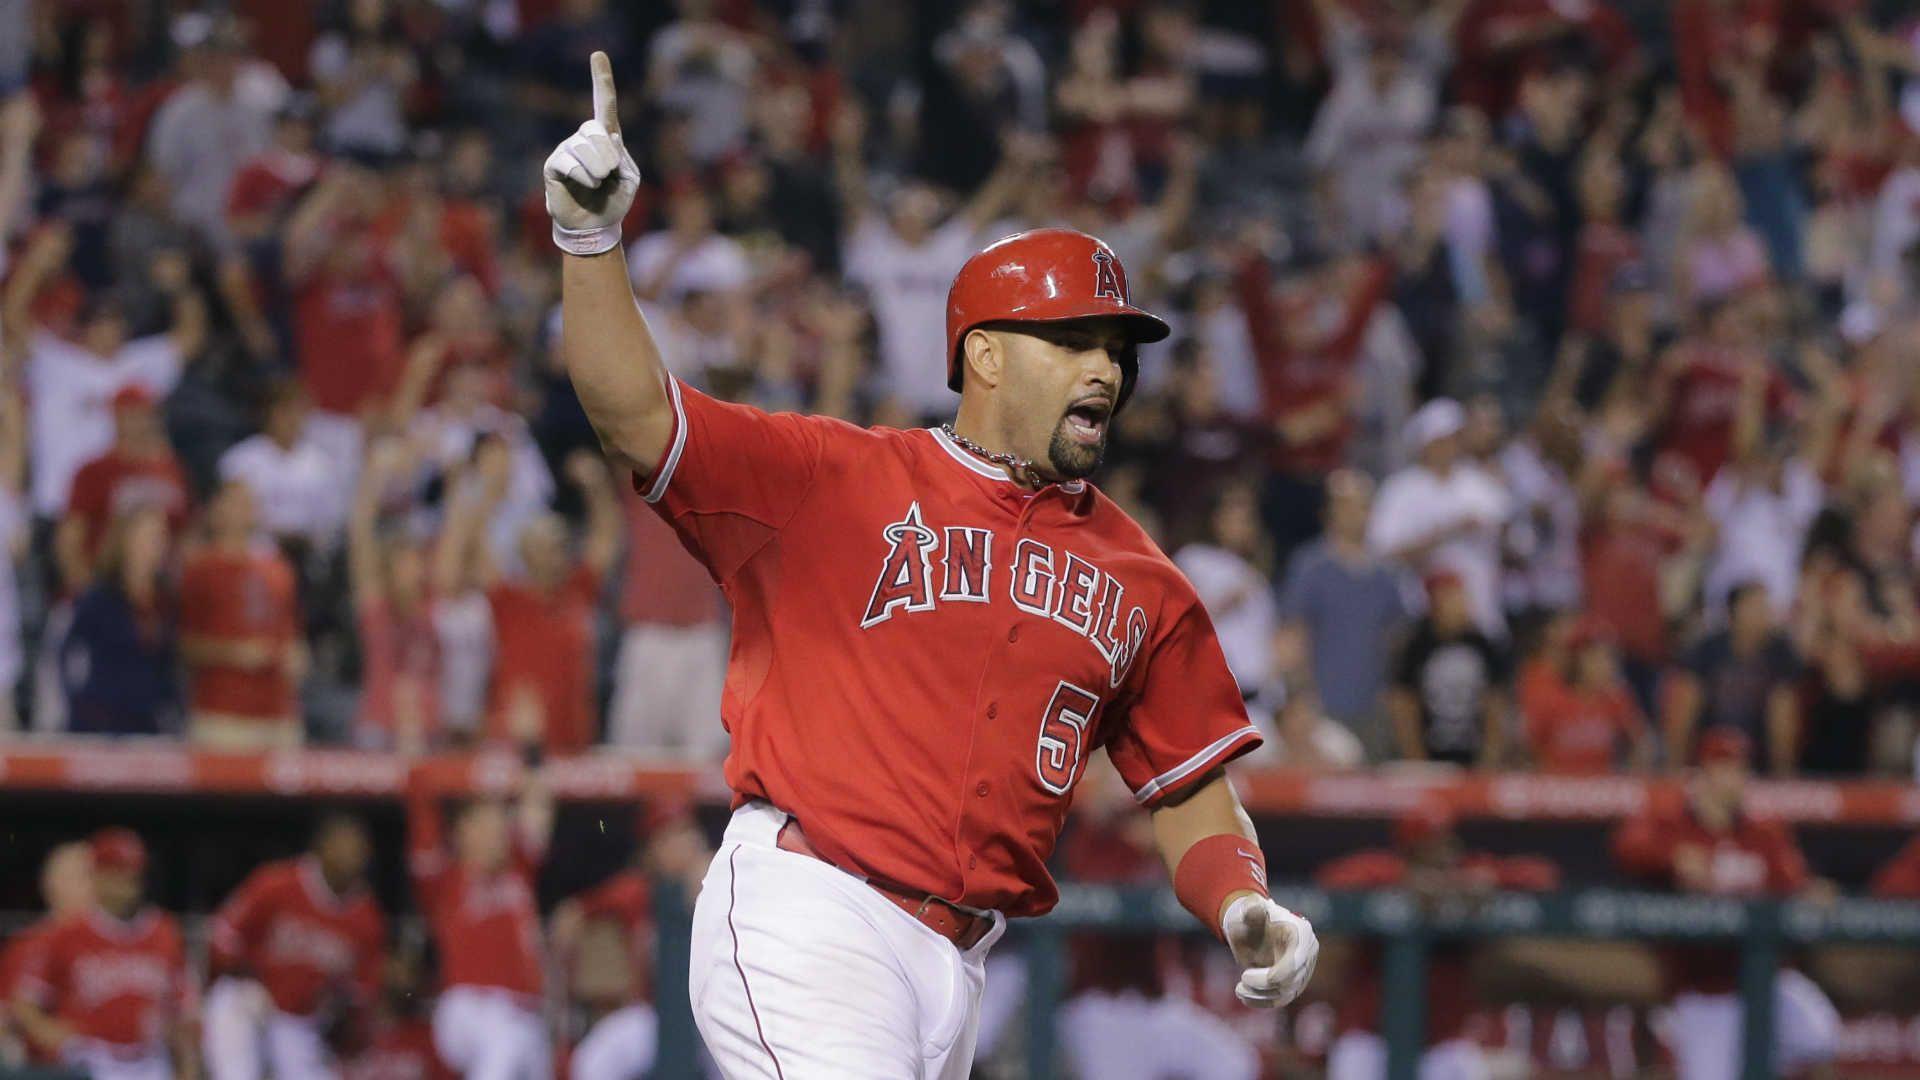 Albert Pujols on a tear, but still falling behind company he used